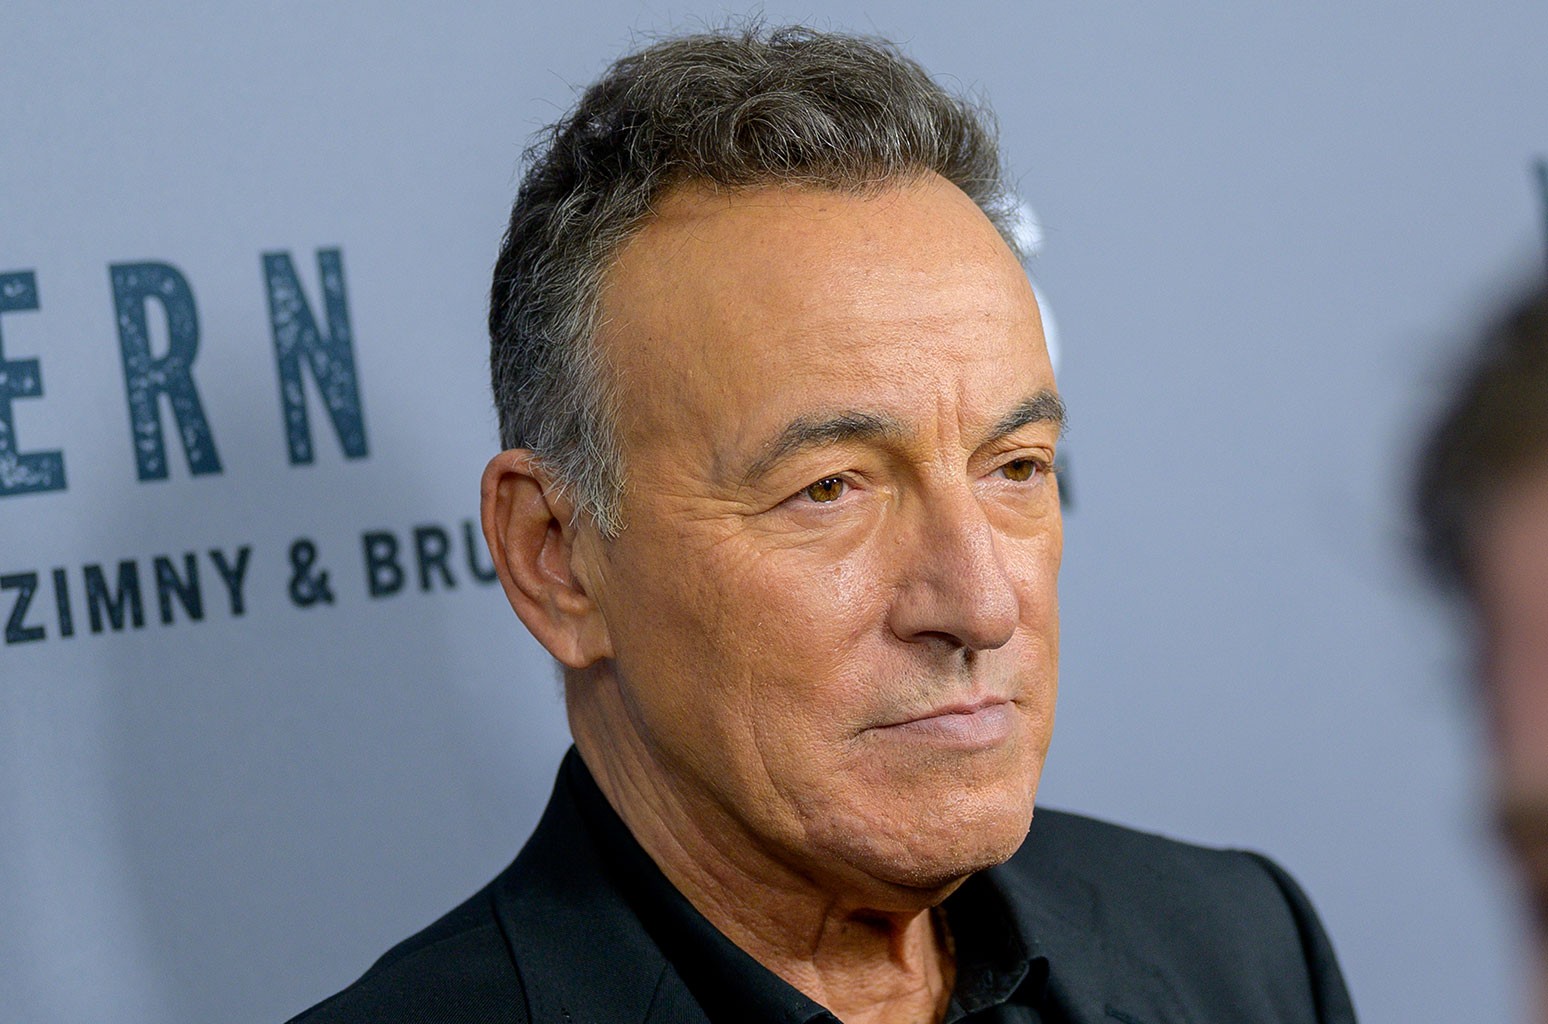 Friends Fear Bruce Springsteen's Health As They Claim "Death Warmed Over Him"